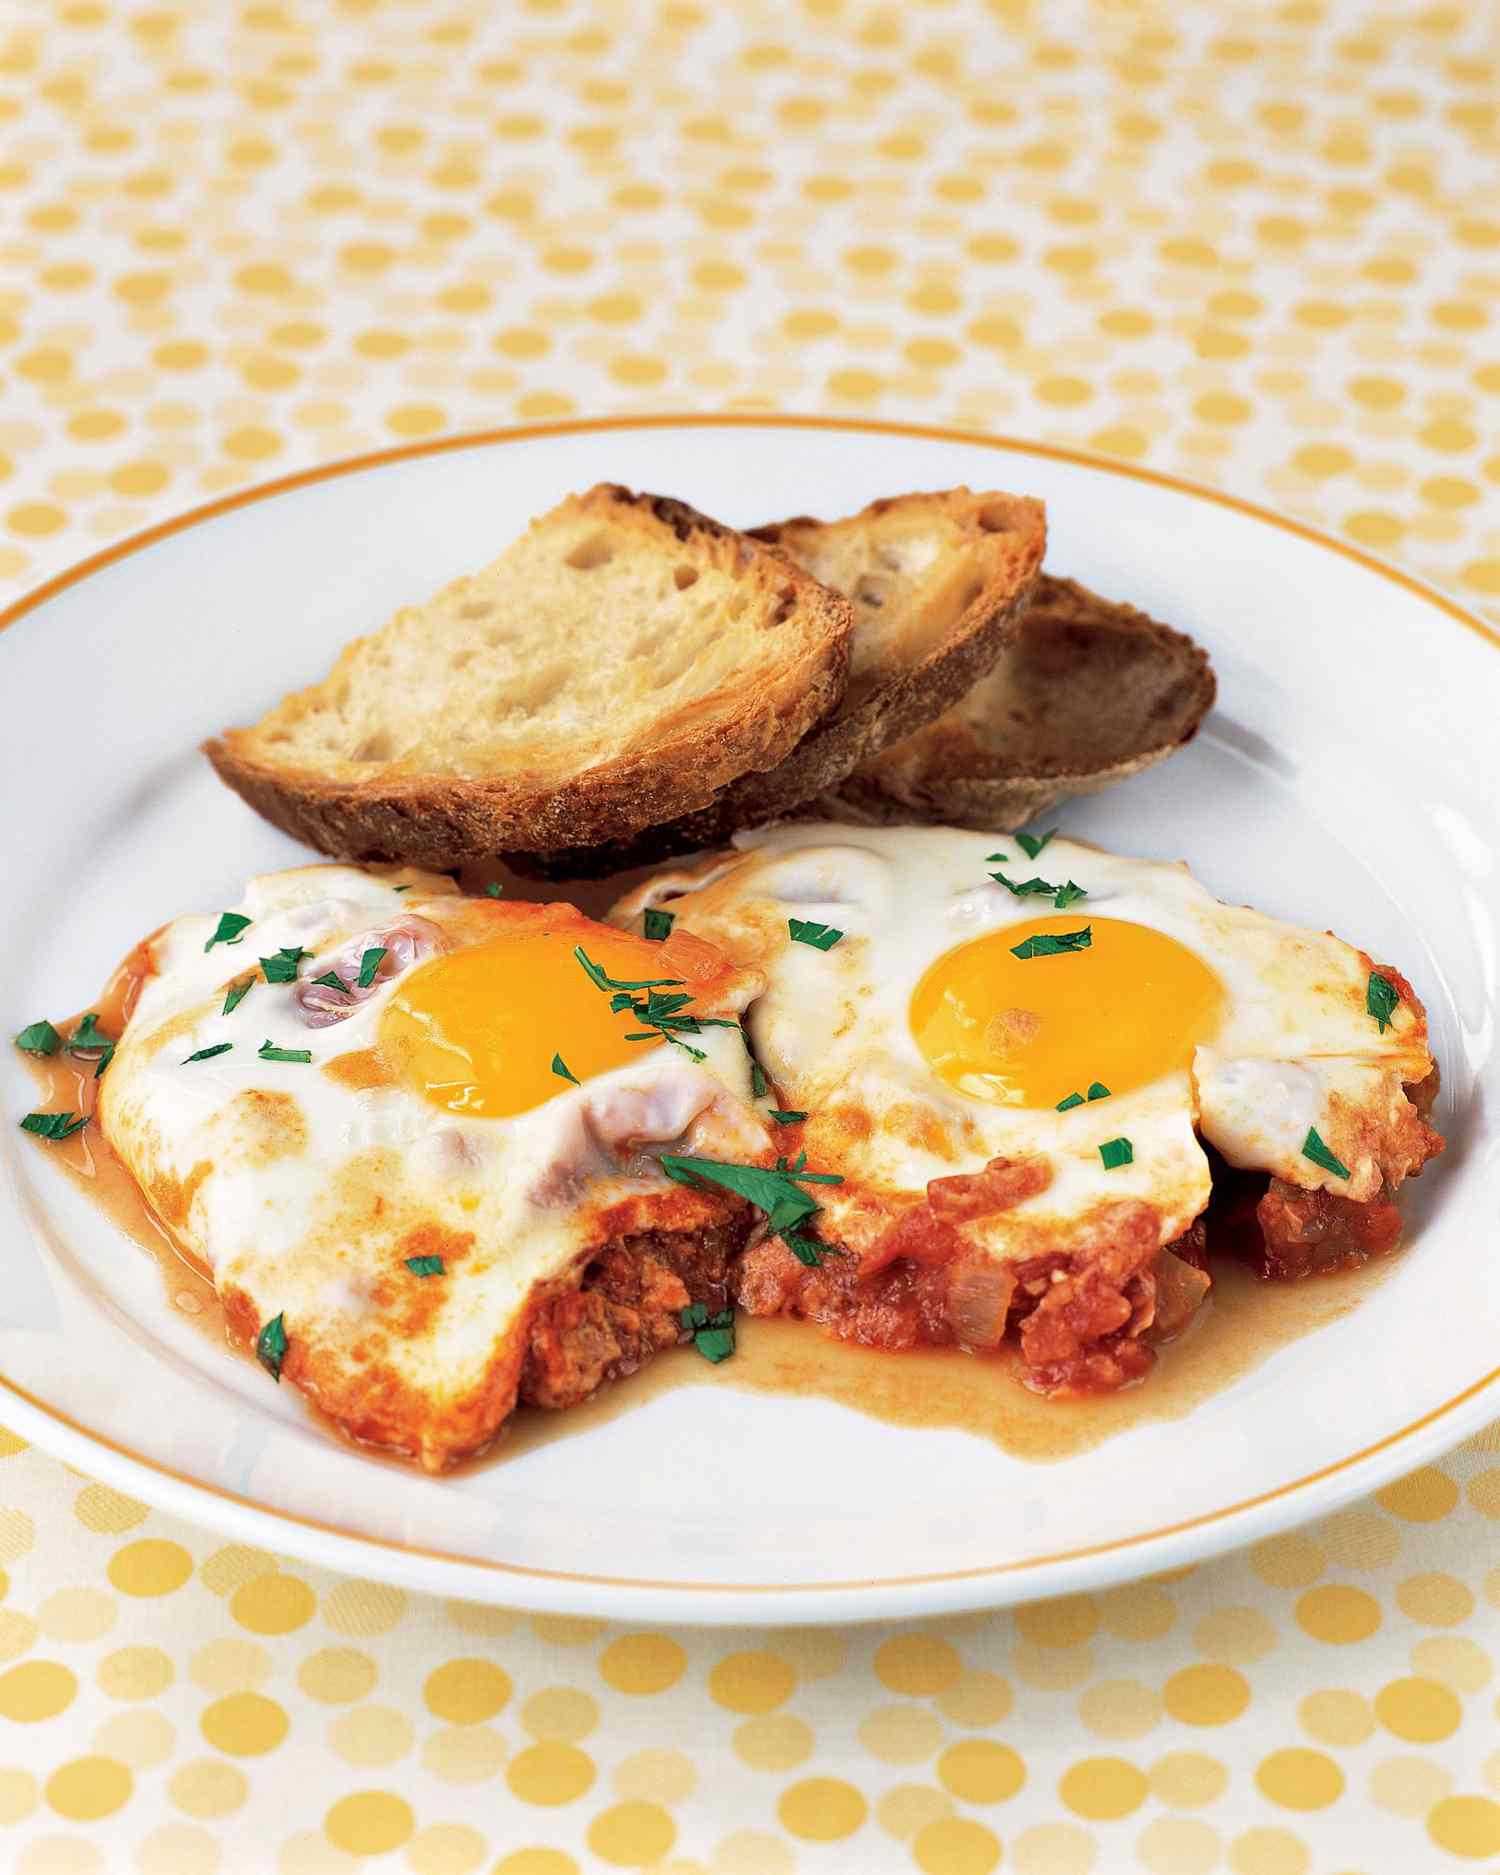 Skillet Eggs and Tomato Sauce